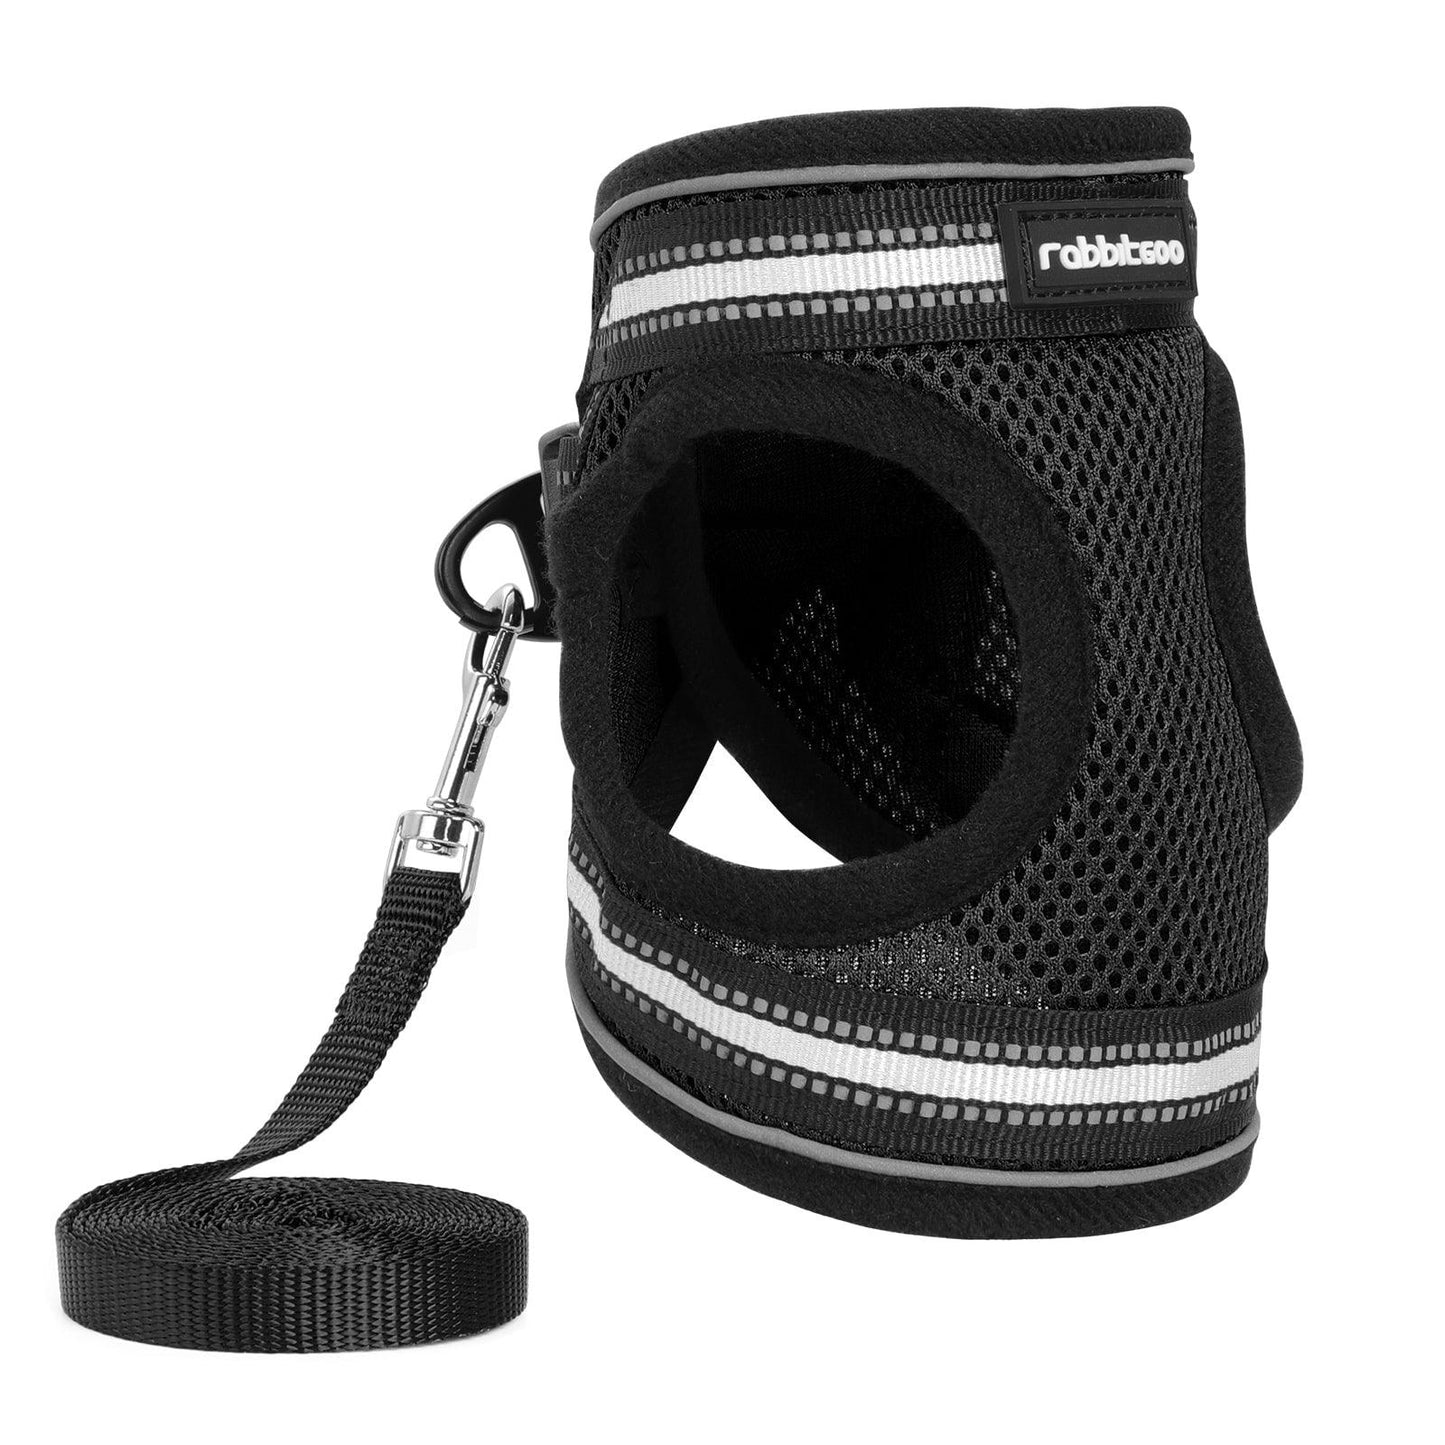 Rabbitgoo Escape Proof Cat Harness and Leash Set, with Reflective Strip